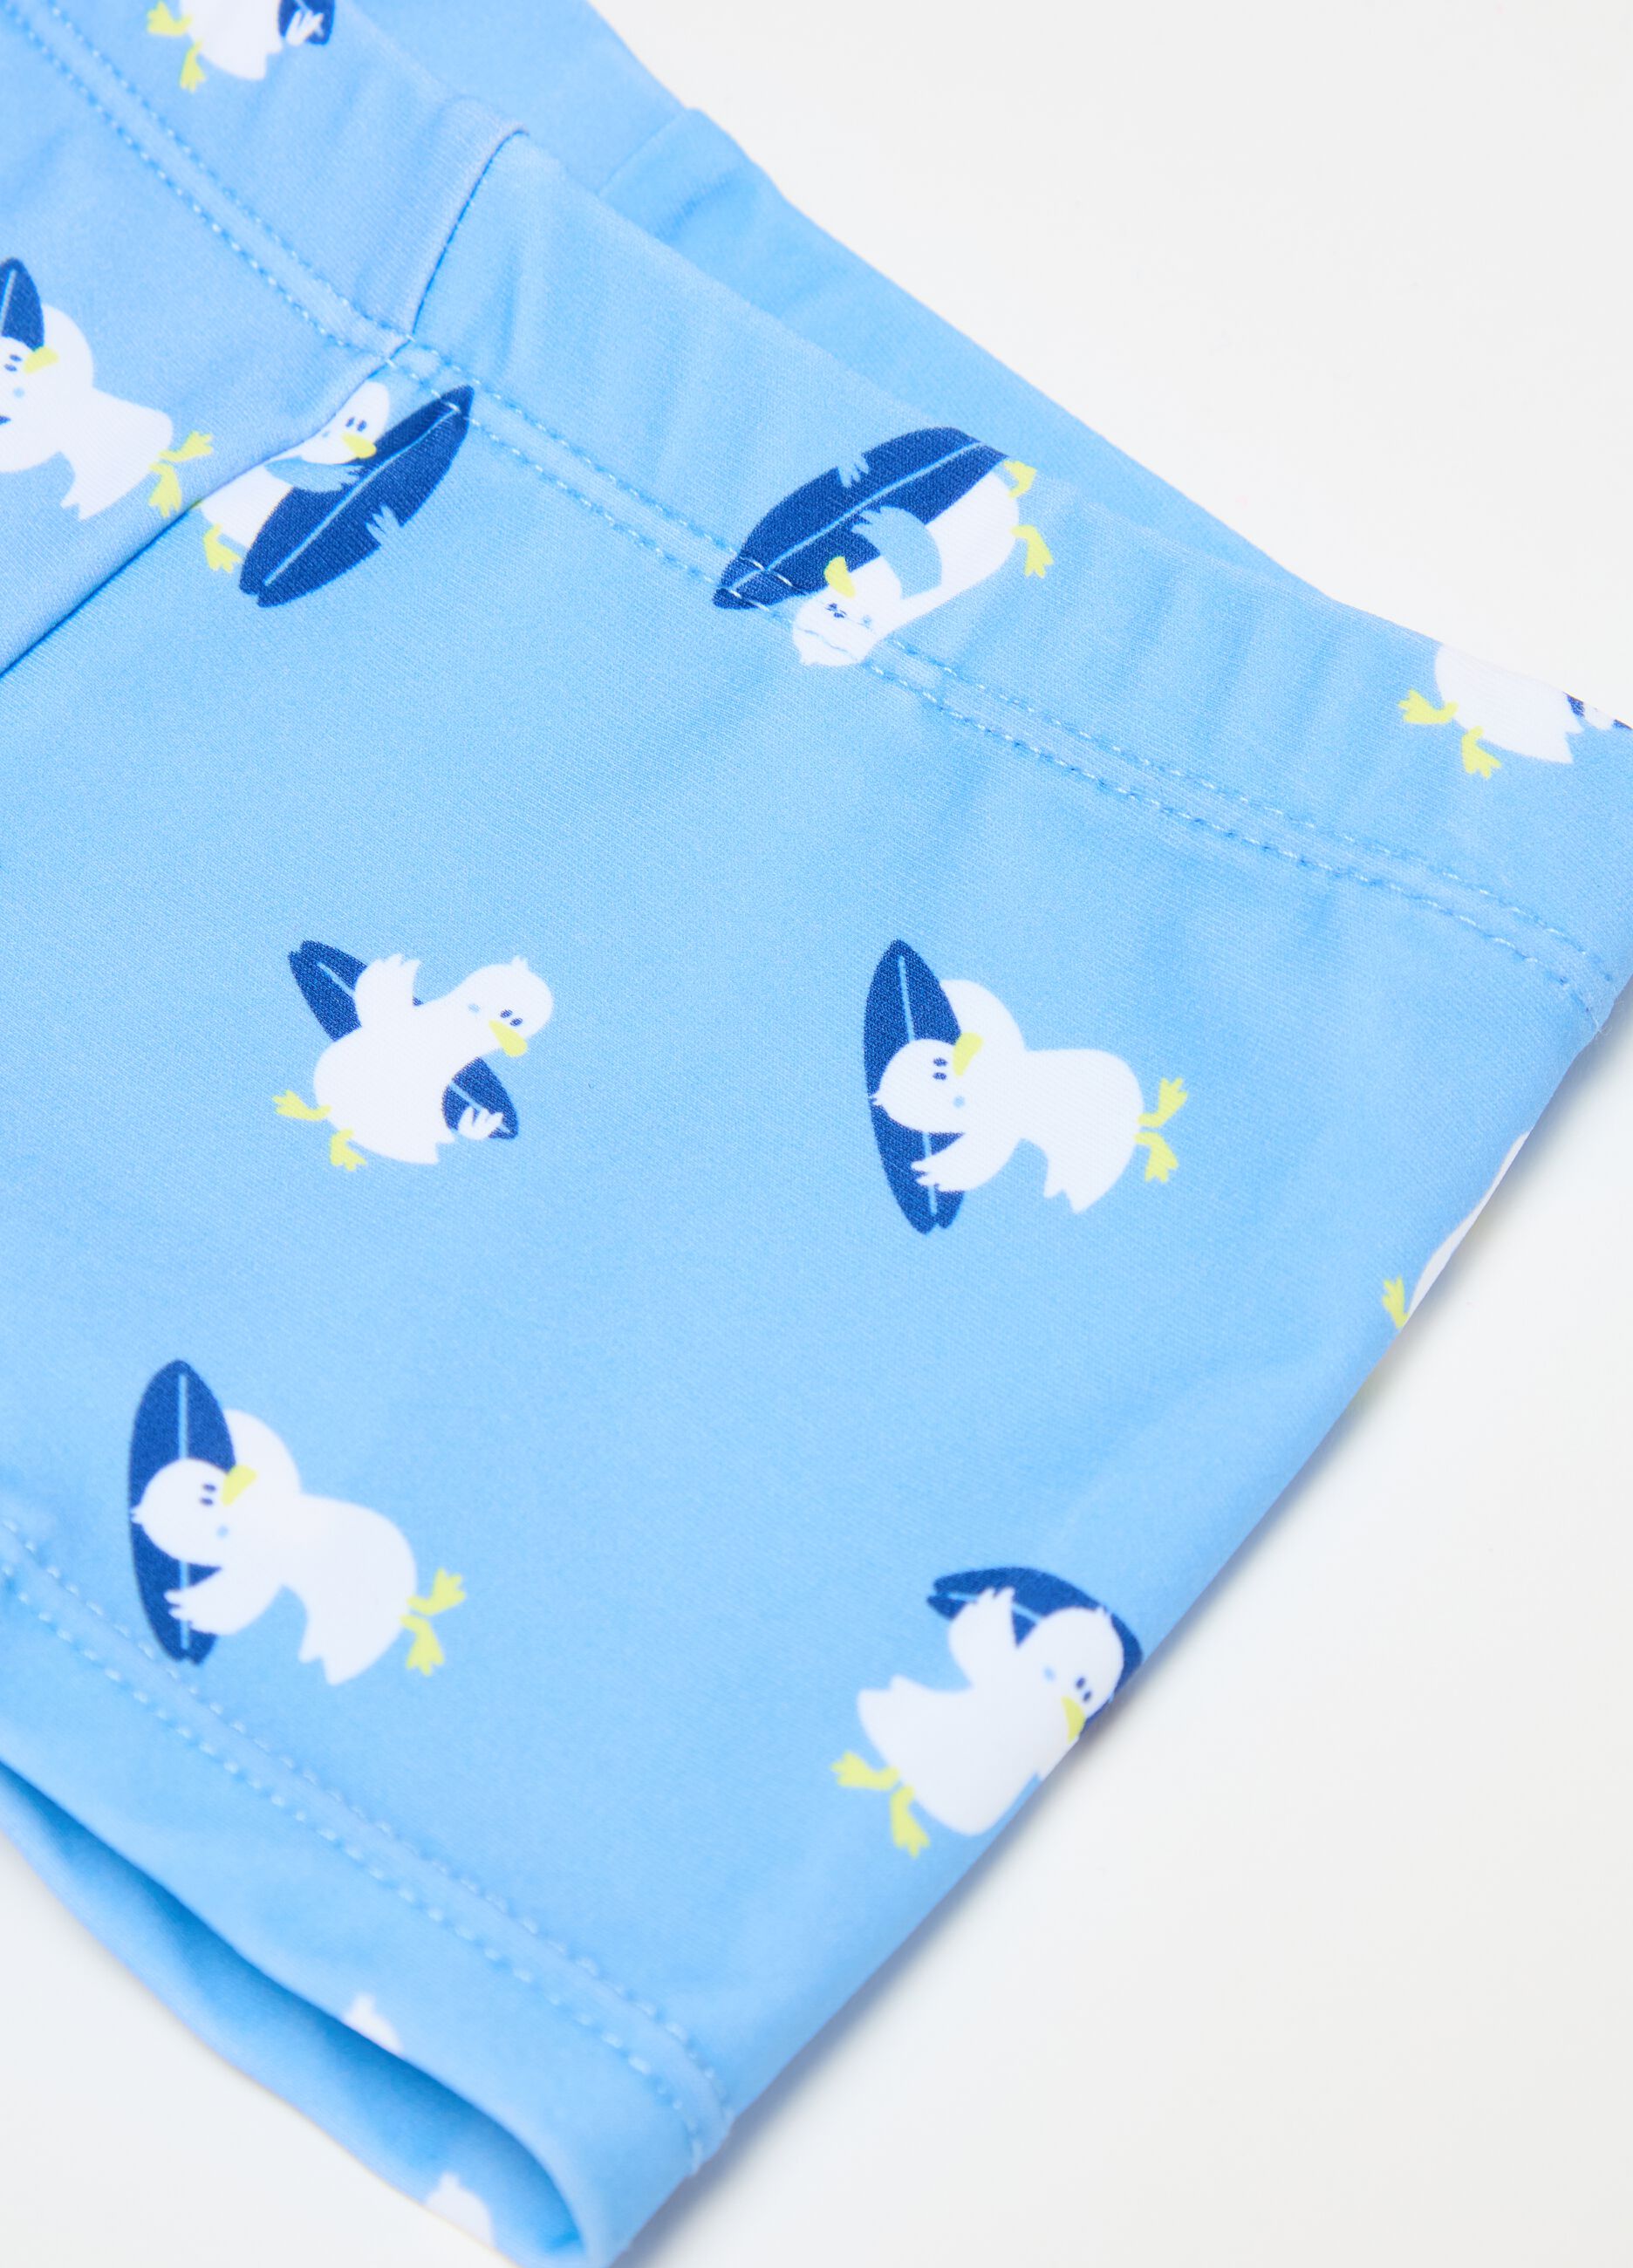 Swimming trunks with seagull print